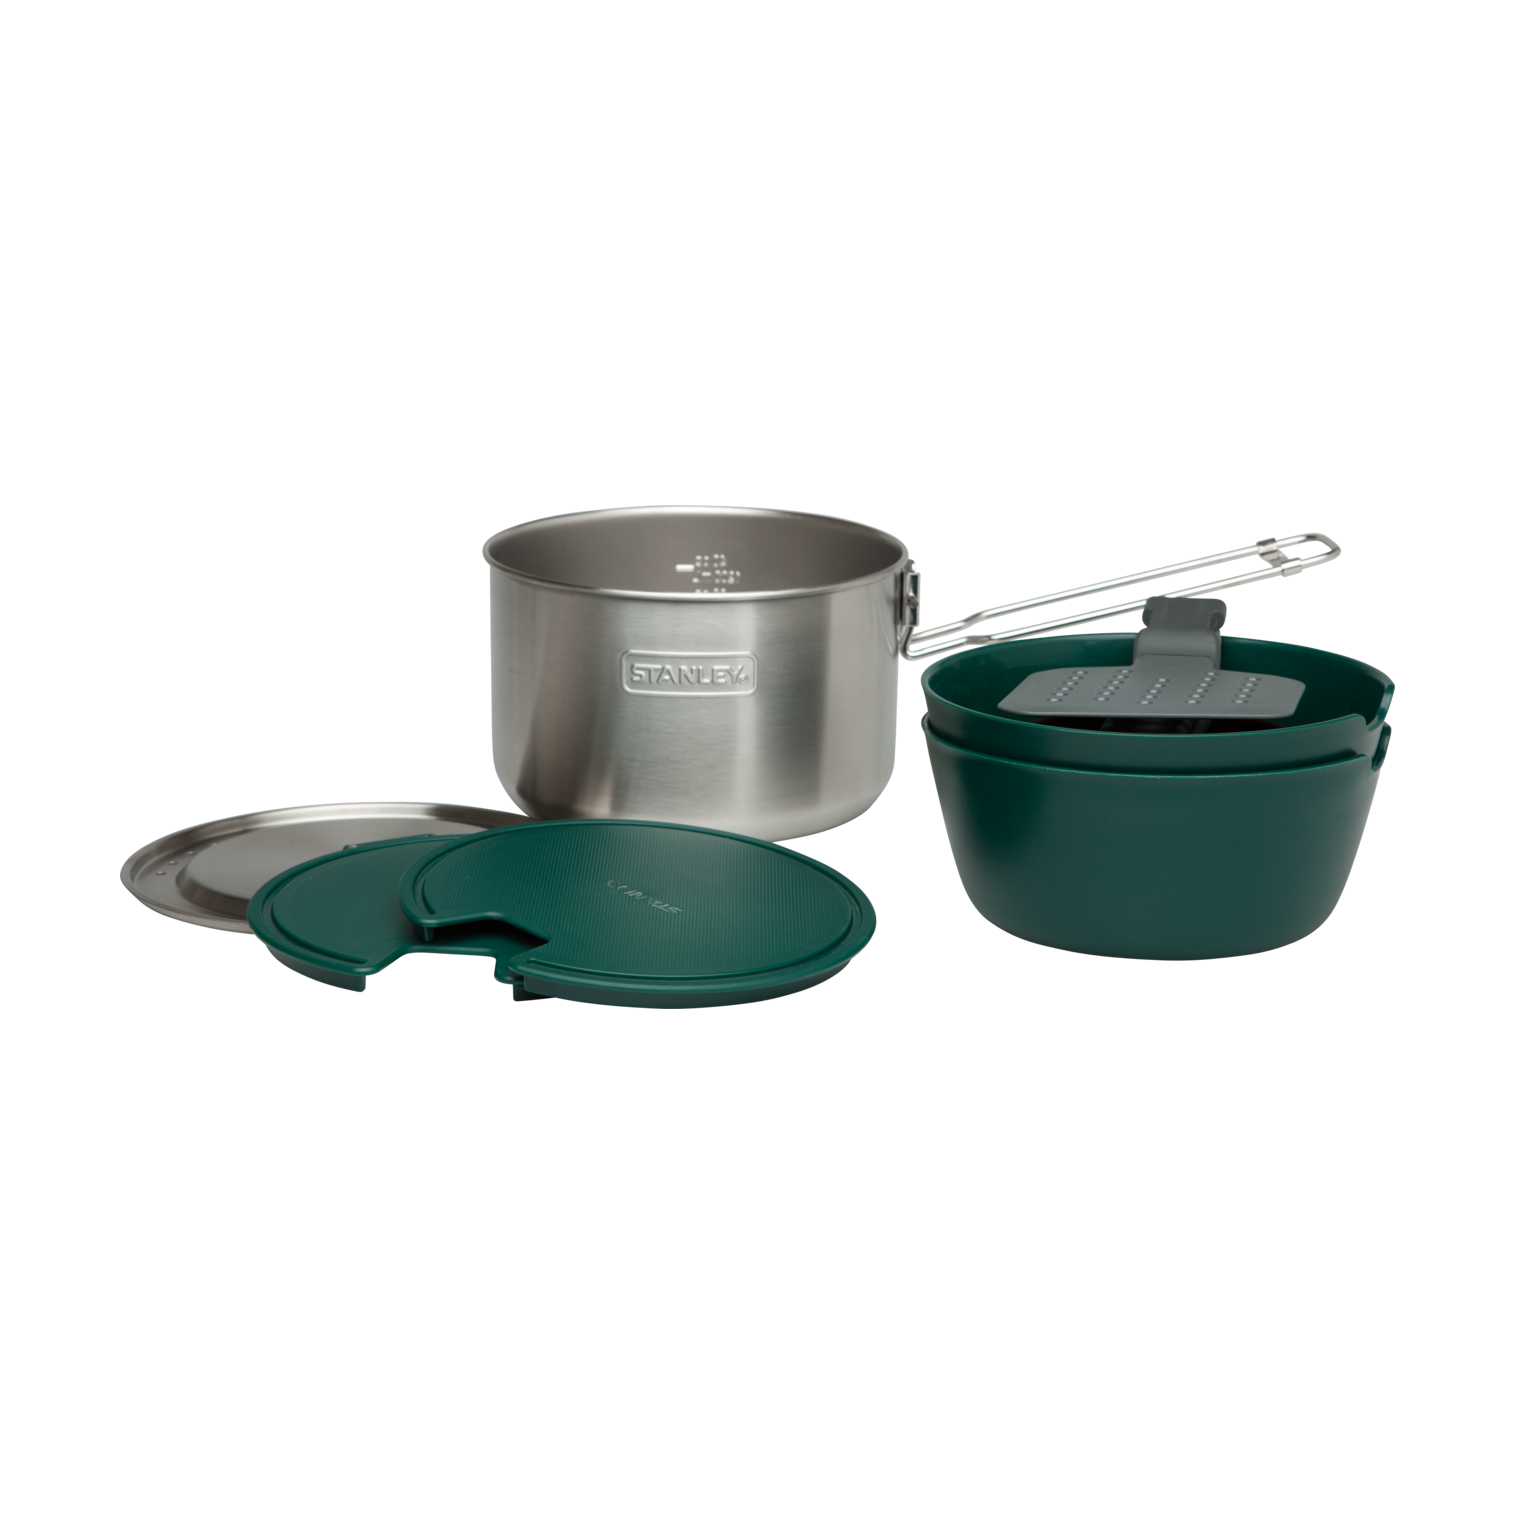 Adventure All-In-One Two Bowl Cookset: Stainless